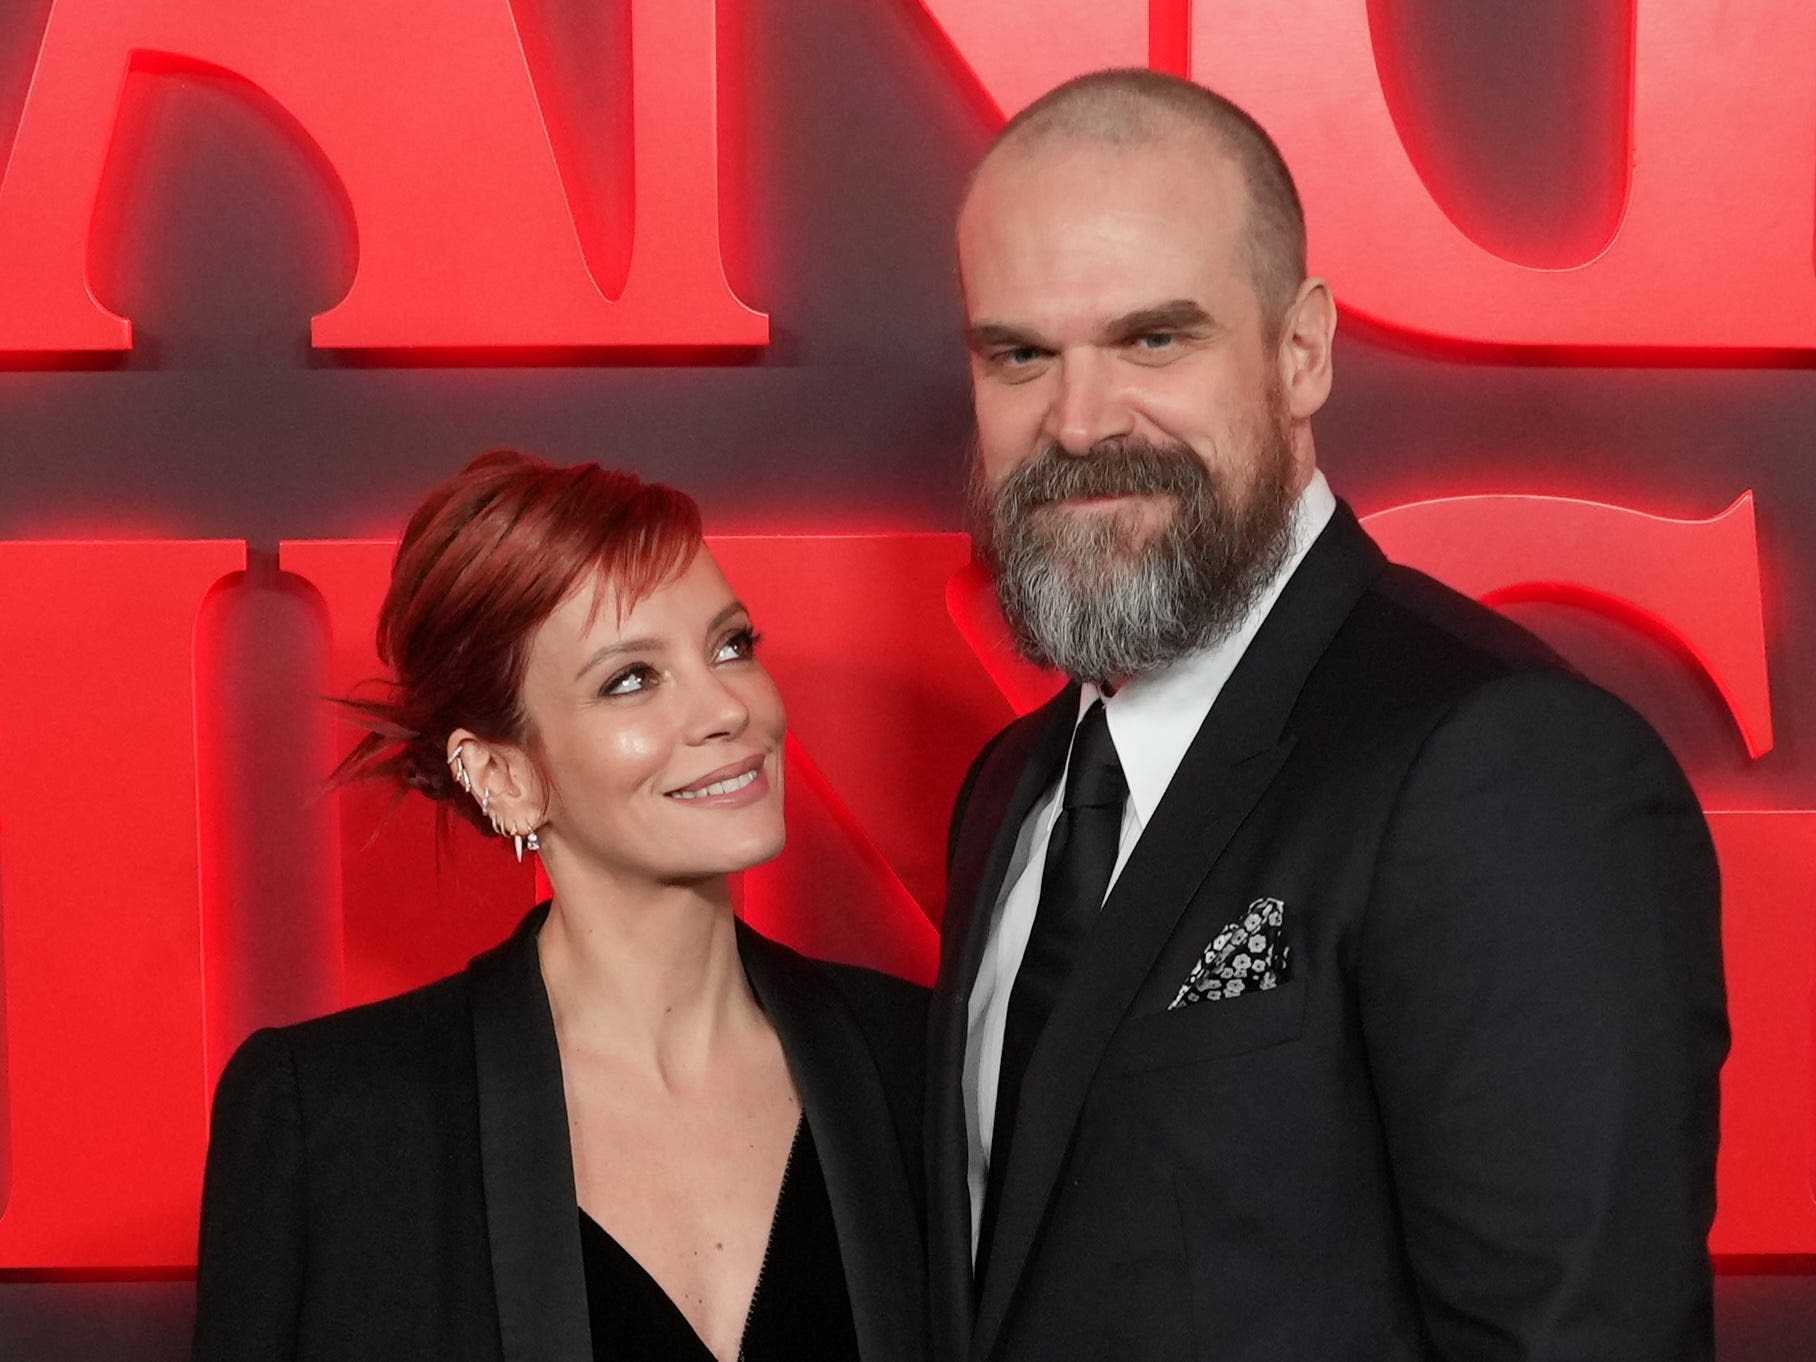 Lily Allen says her husband, actor David Harbour, controls the apps on her phone